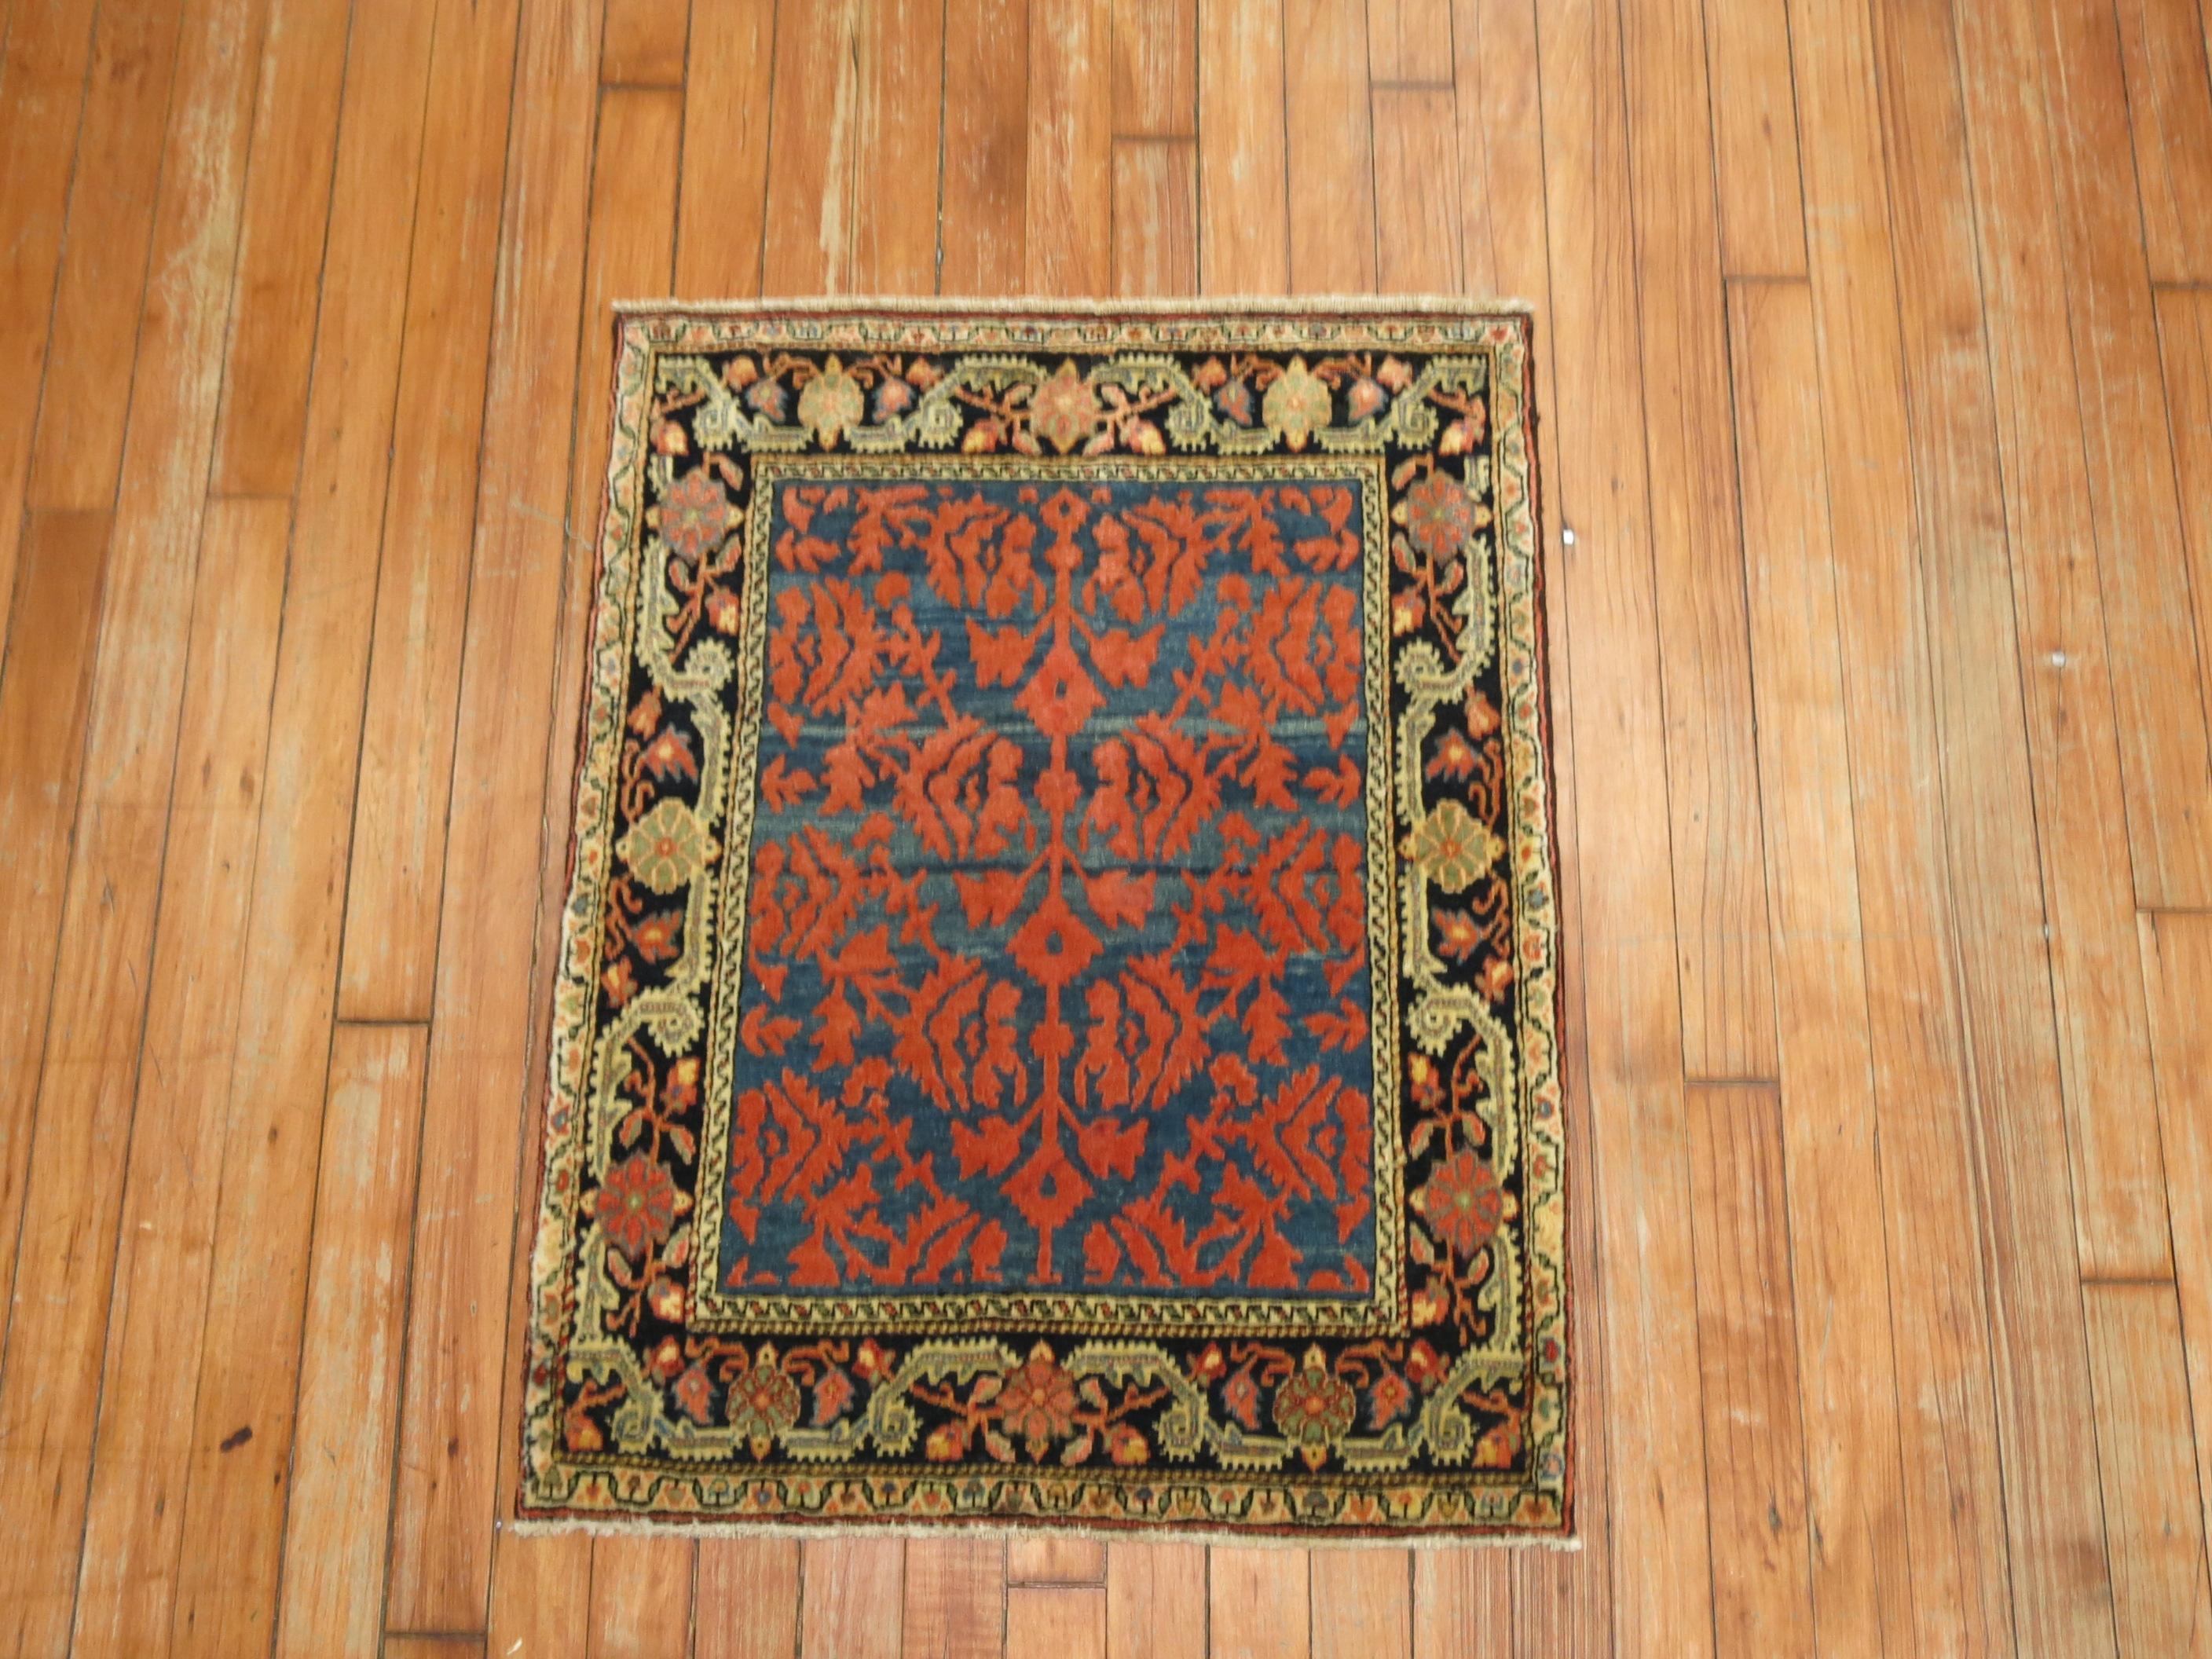 An early 20th century Souf carpet woven somewhere in Iran. 

Souf rugs are very rare technique found as they have a raised low and high pile technique. They are popular in Iran and little understood elsewhere except by Persians and people who